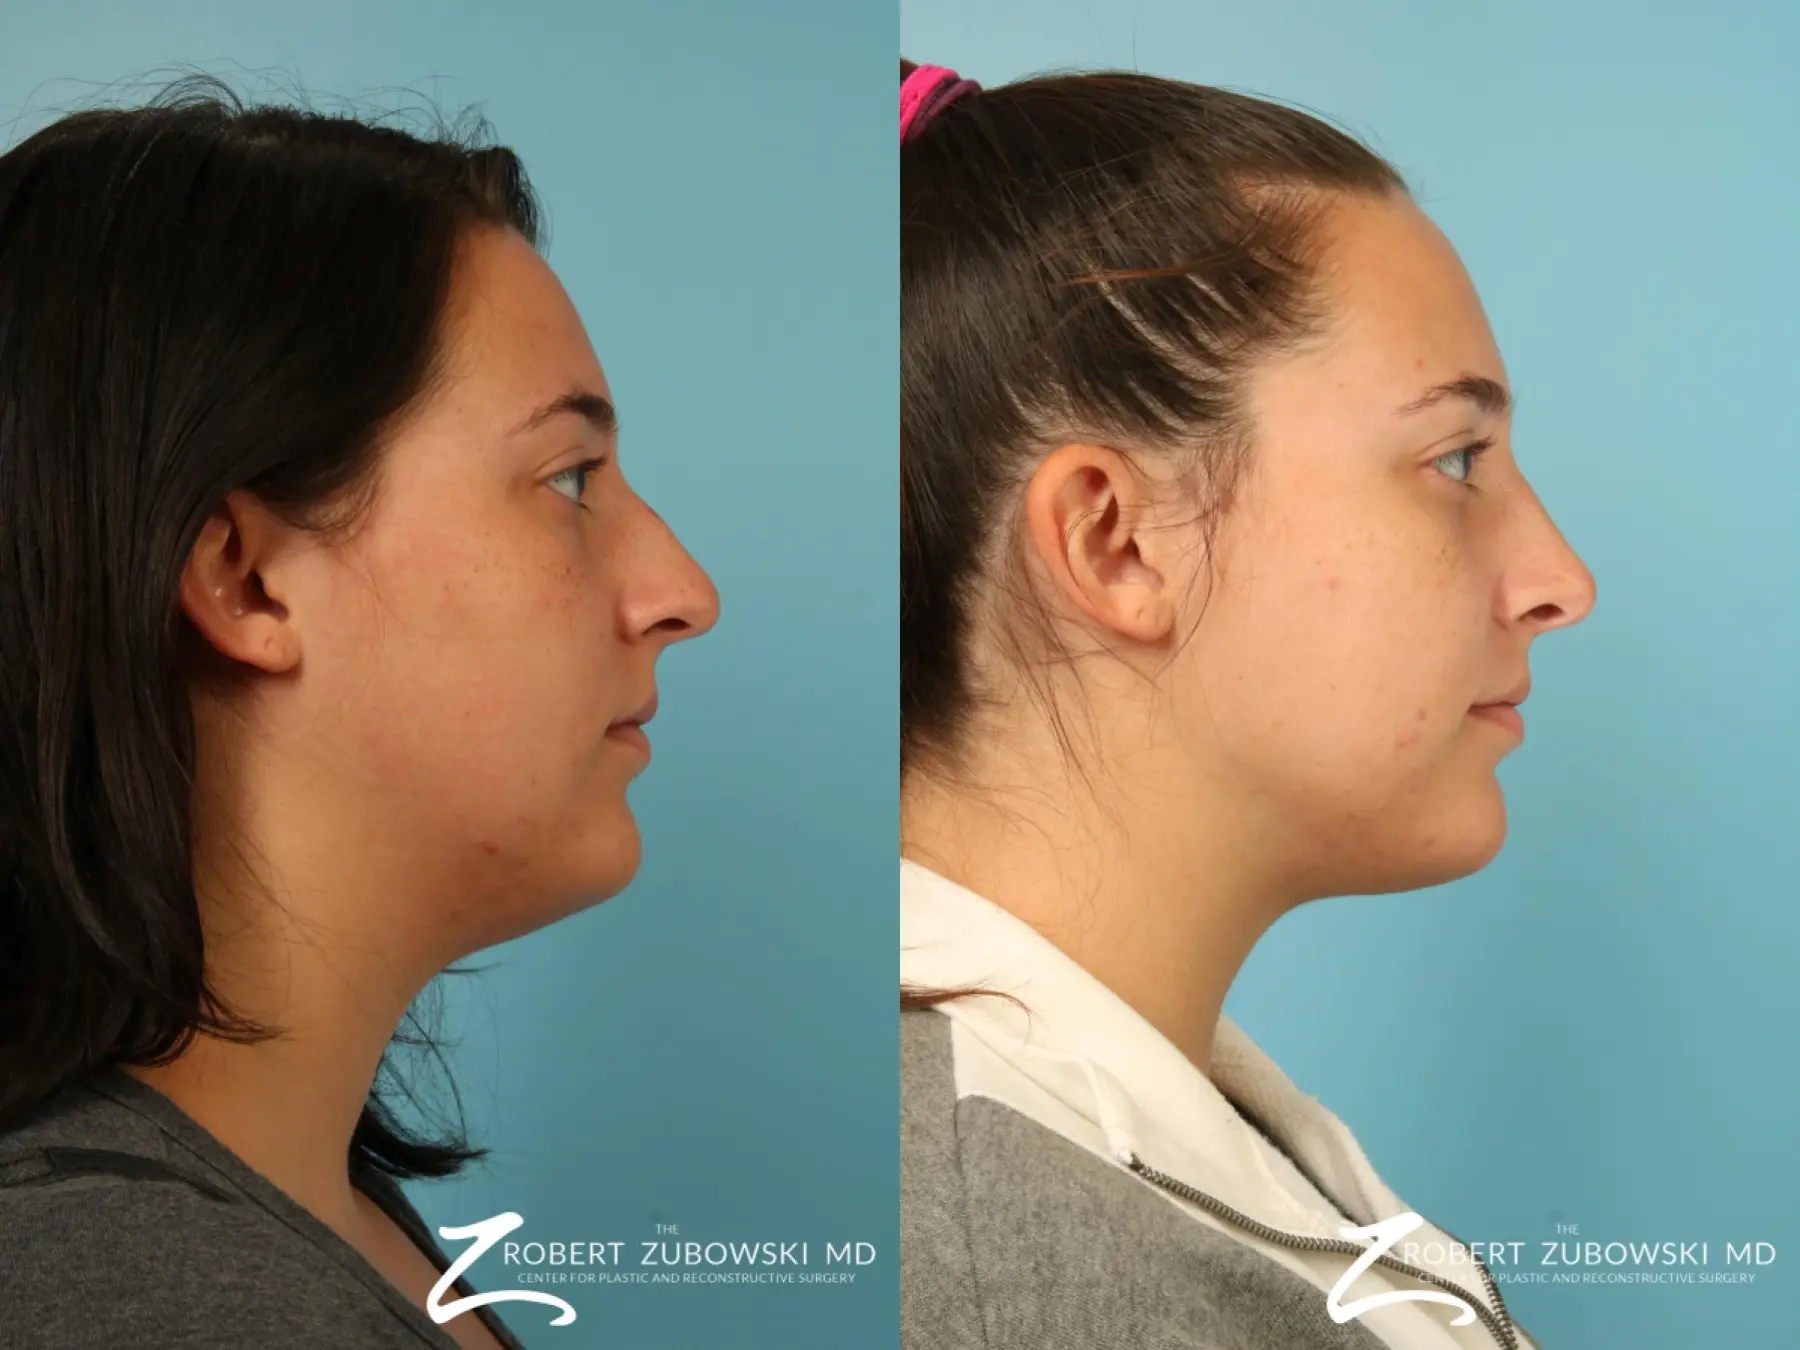 Liposuction Of The Neck: Patient 1 - Before and After 2